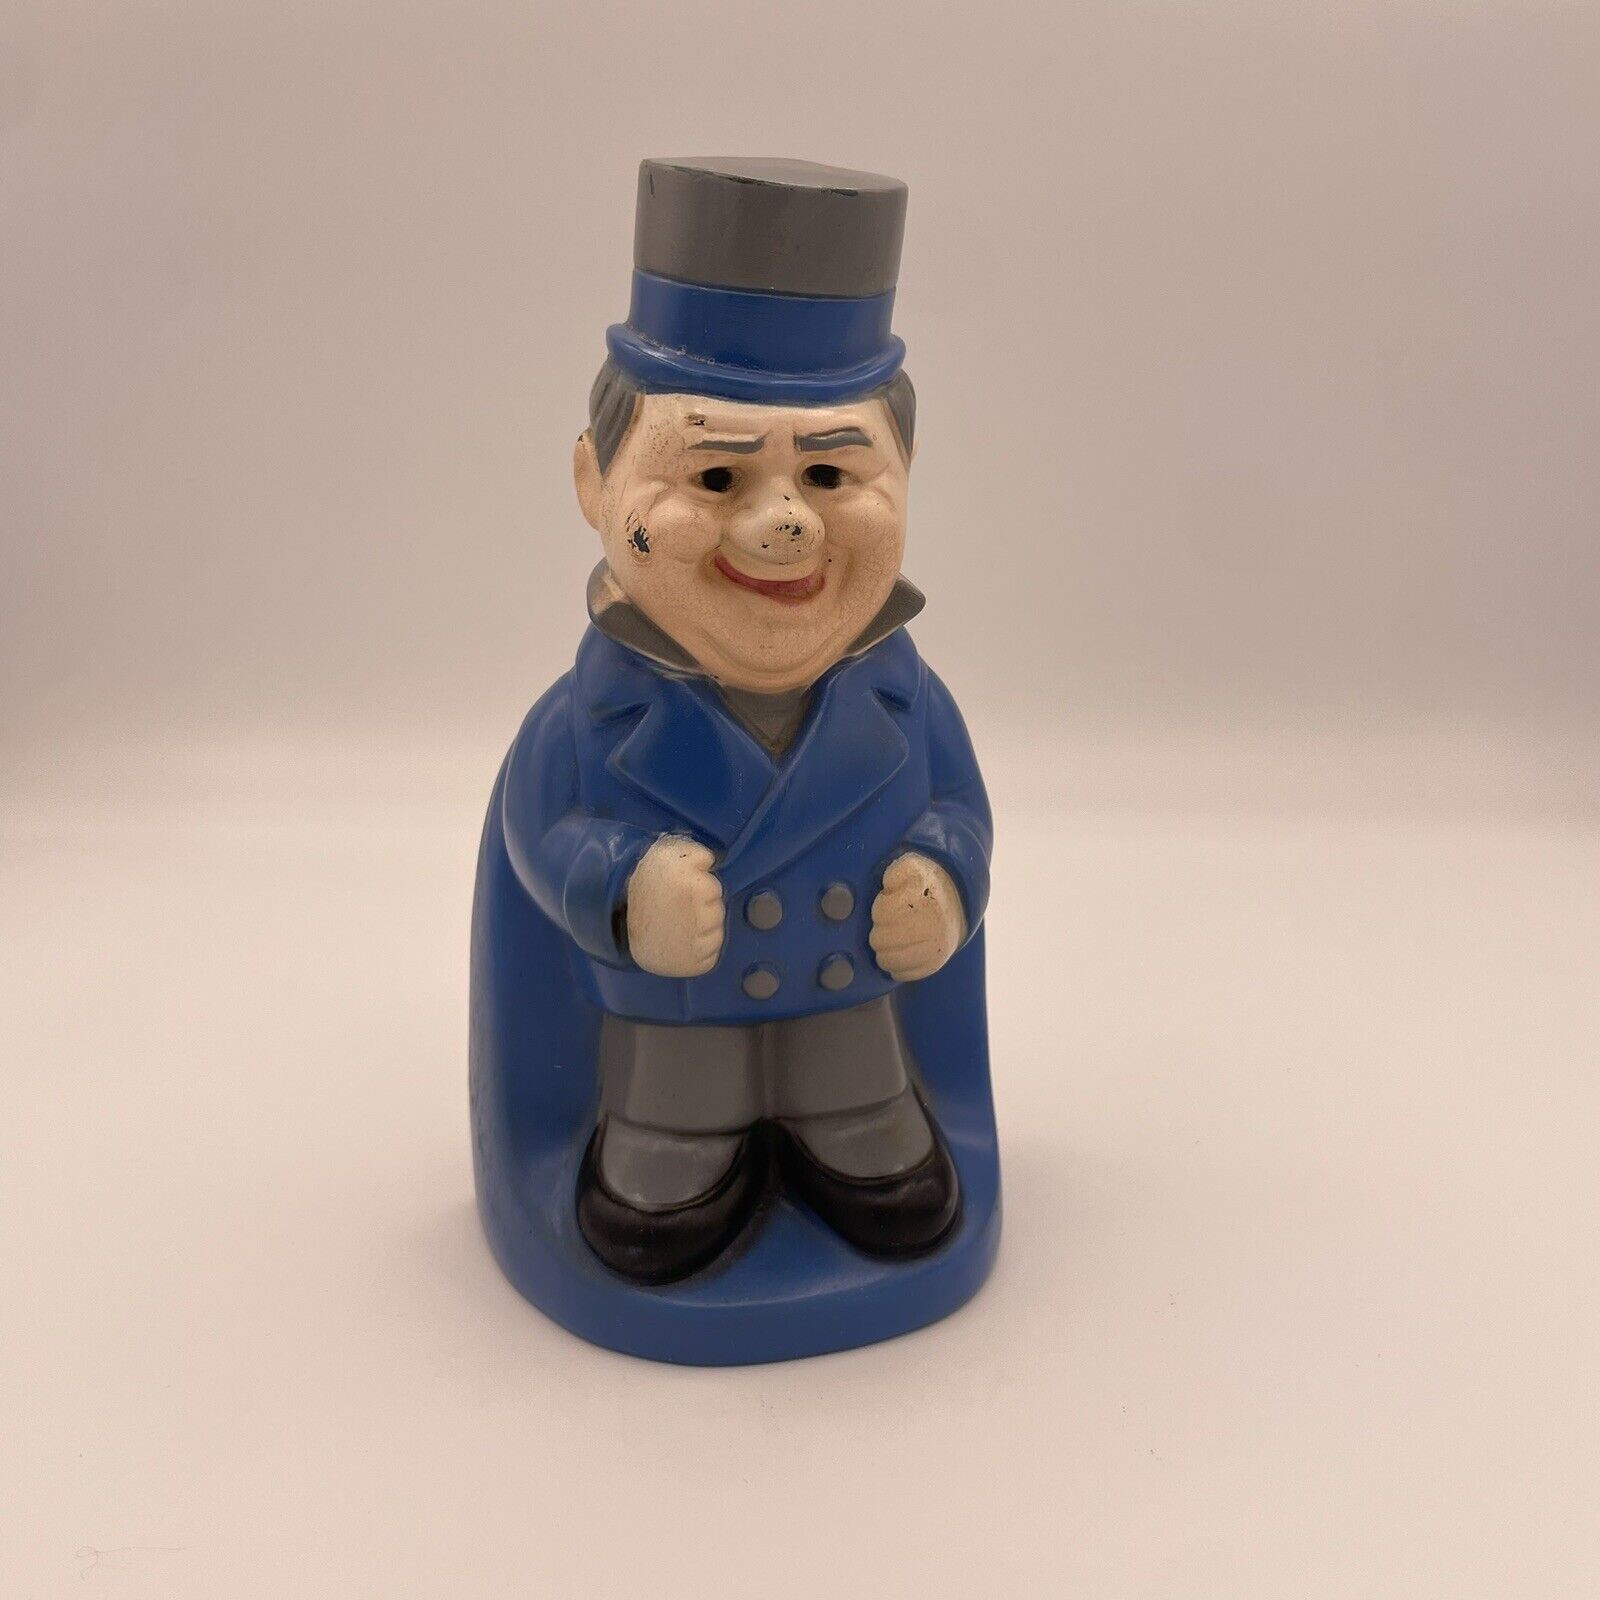 WC Fields Mgm David Copperfield Vintage Coin Bank